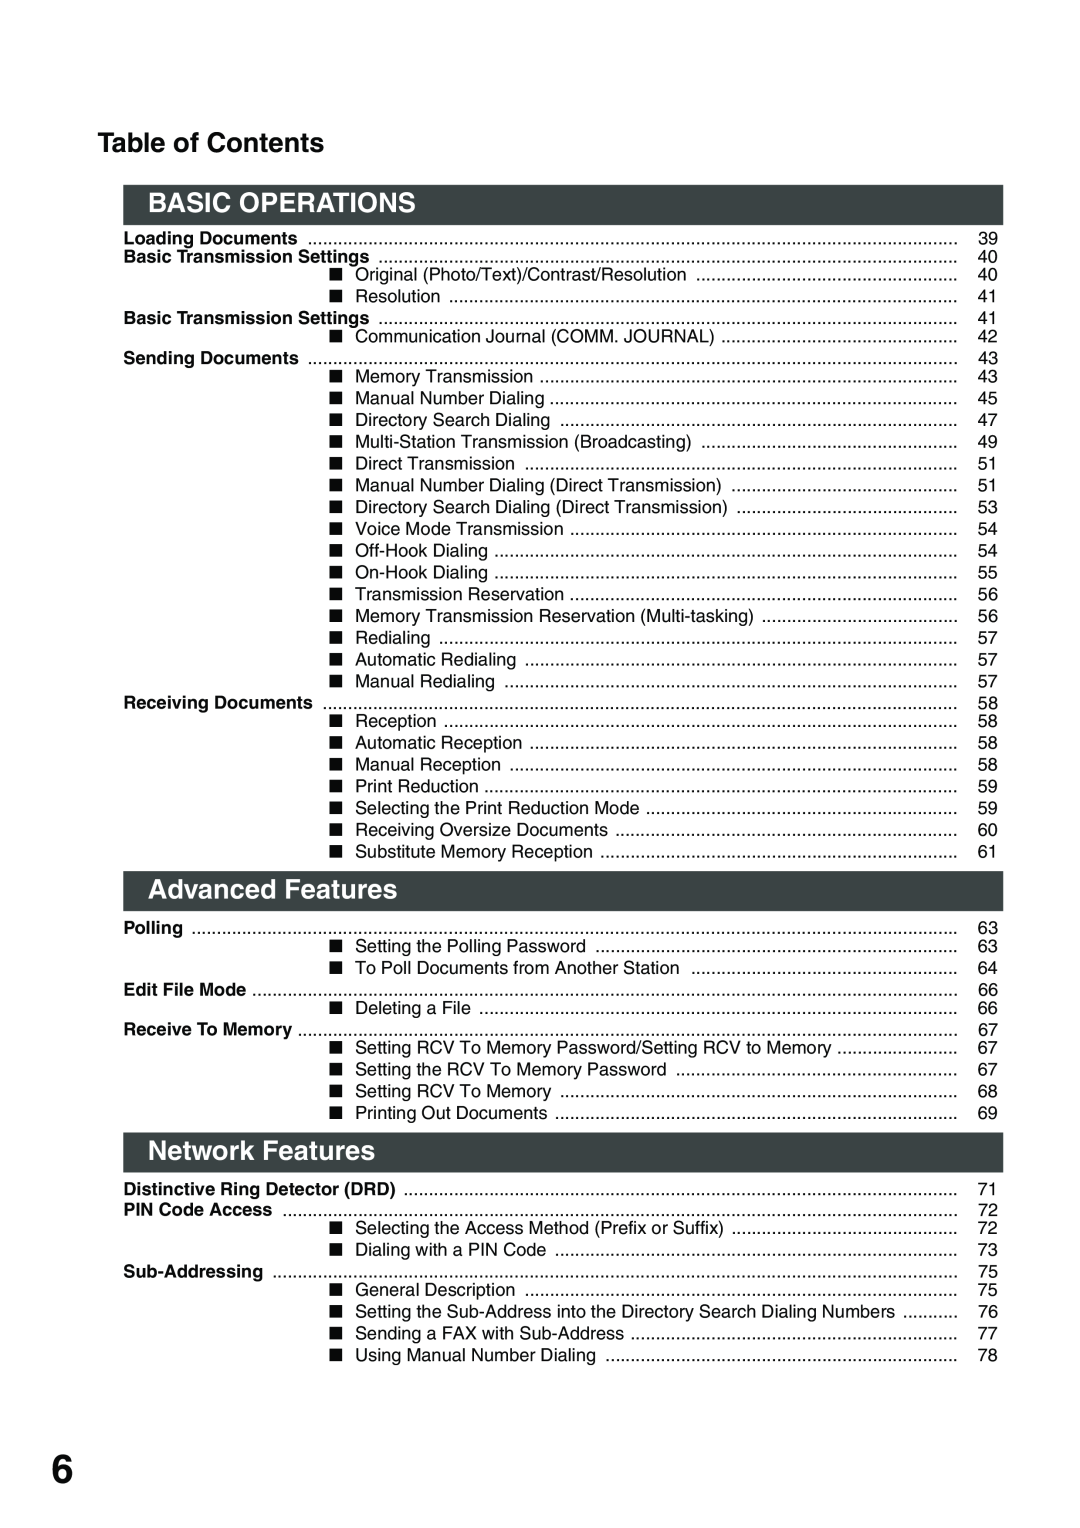 Panasonic DP-135FP appendix Basic Operations, Advanced Features, Network Features, Table of Contents 